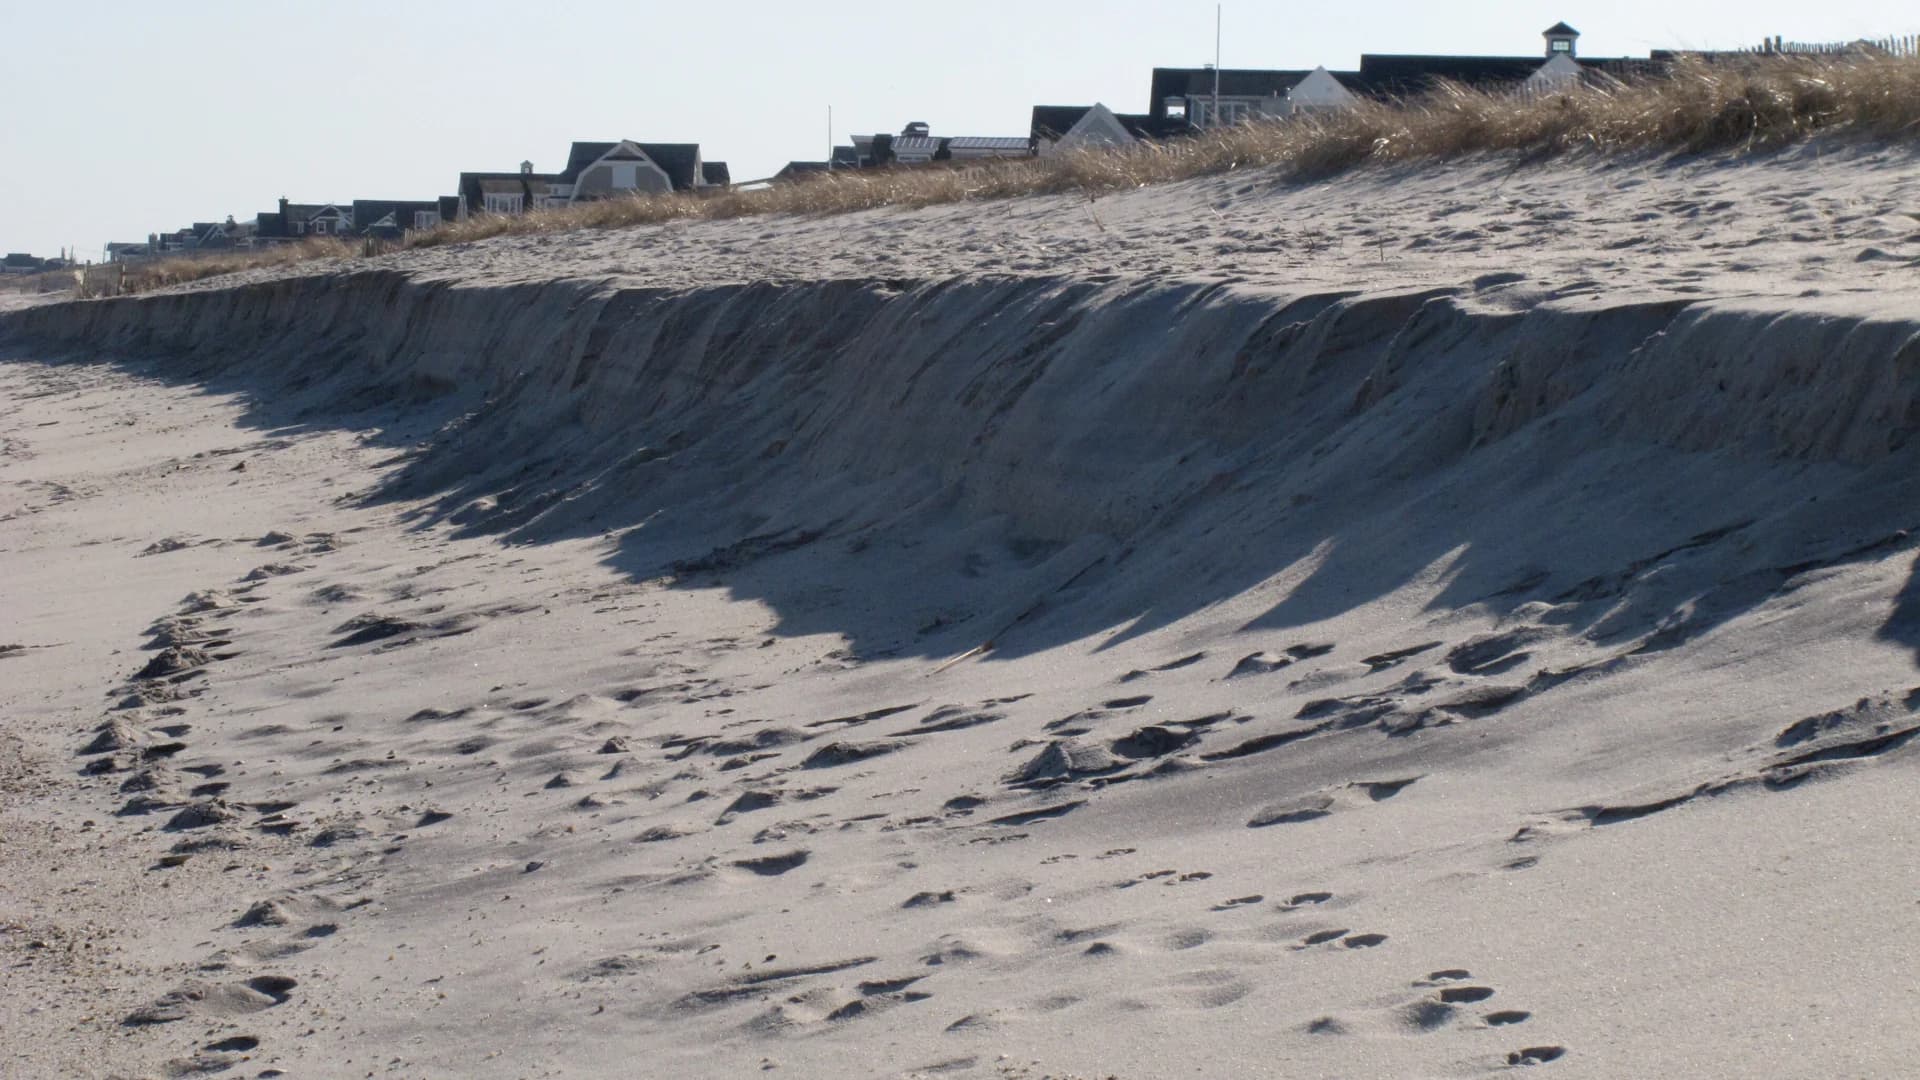 Sand 'back passing' project to restore one Jersey Shore town's beaches